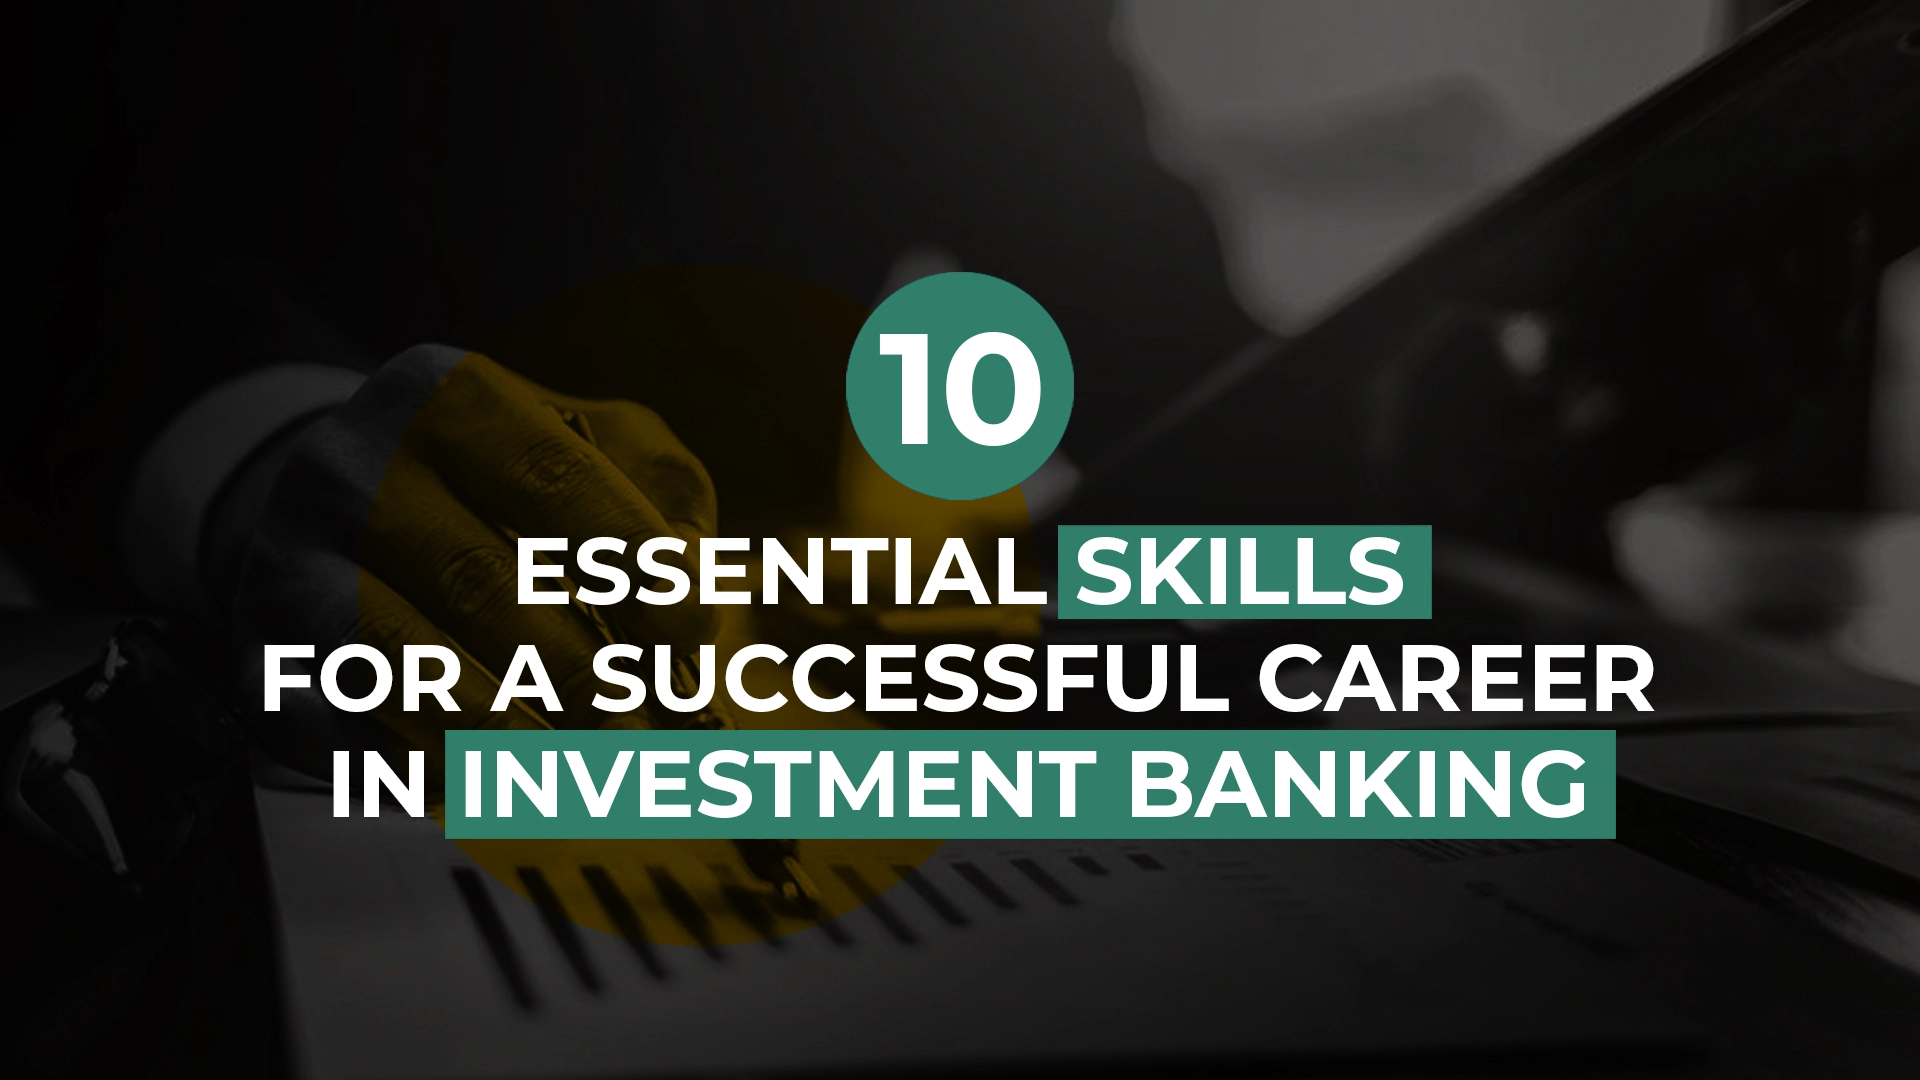 10 Essential skills for a successful career in investment banking